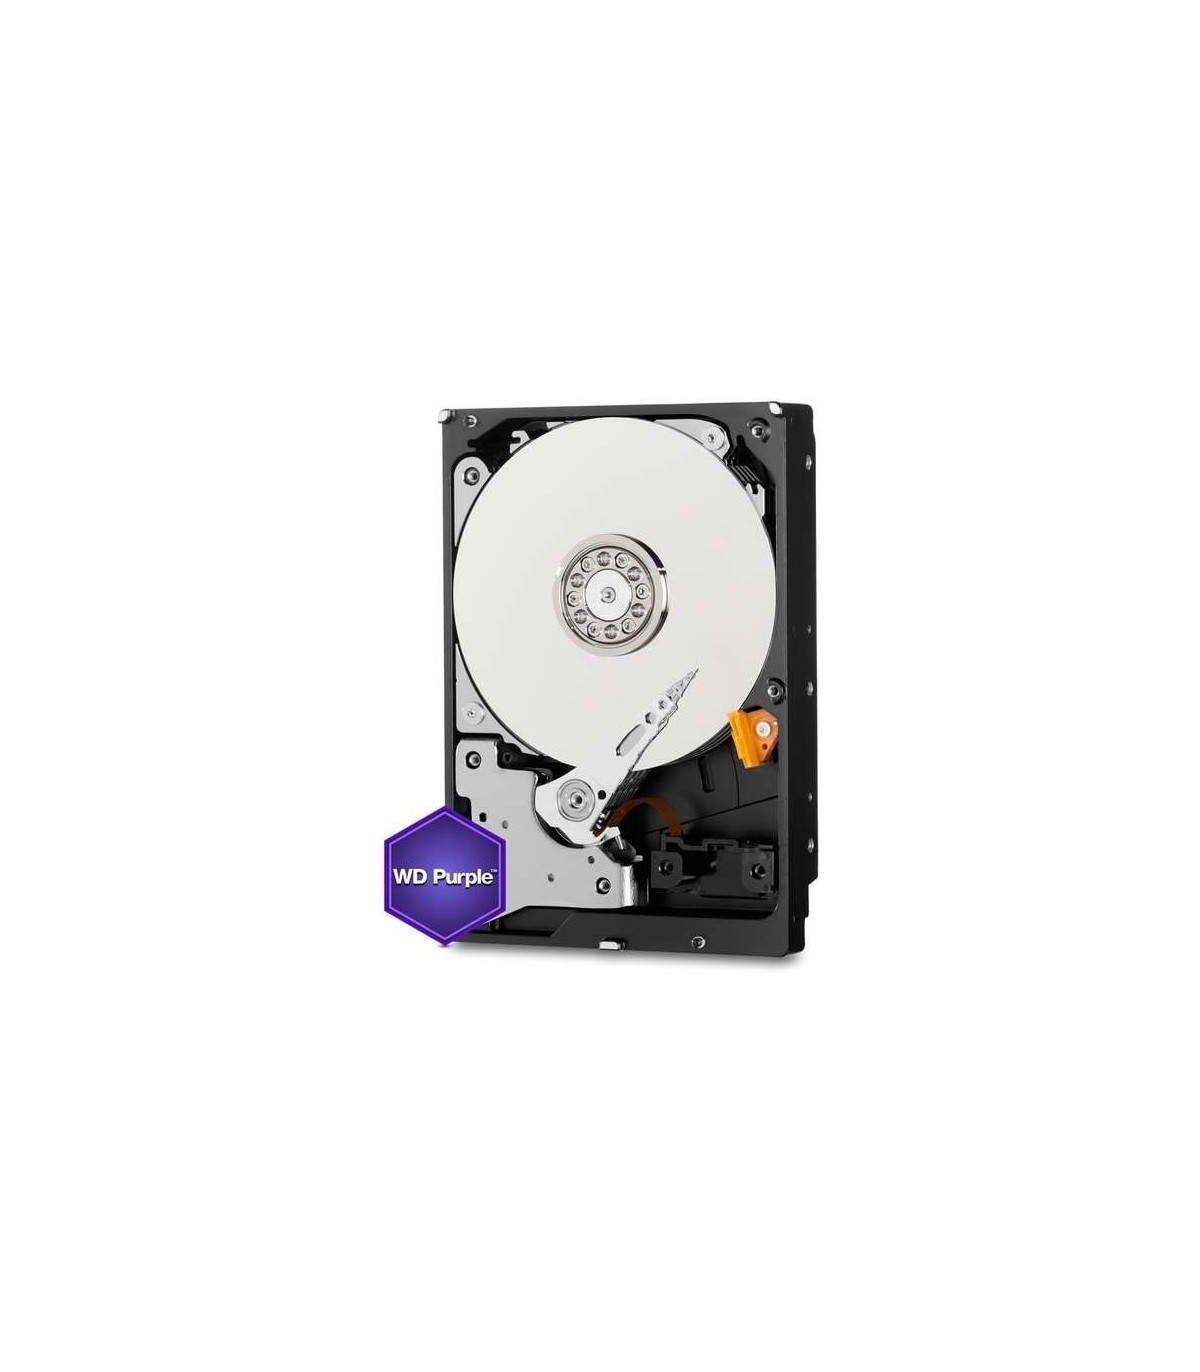 Time series Competitive Plumber Hard Drive specific for video survellance 3TB WD Purple